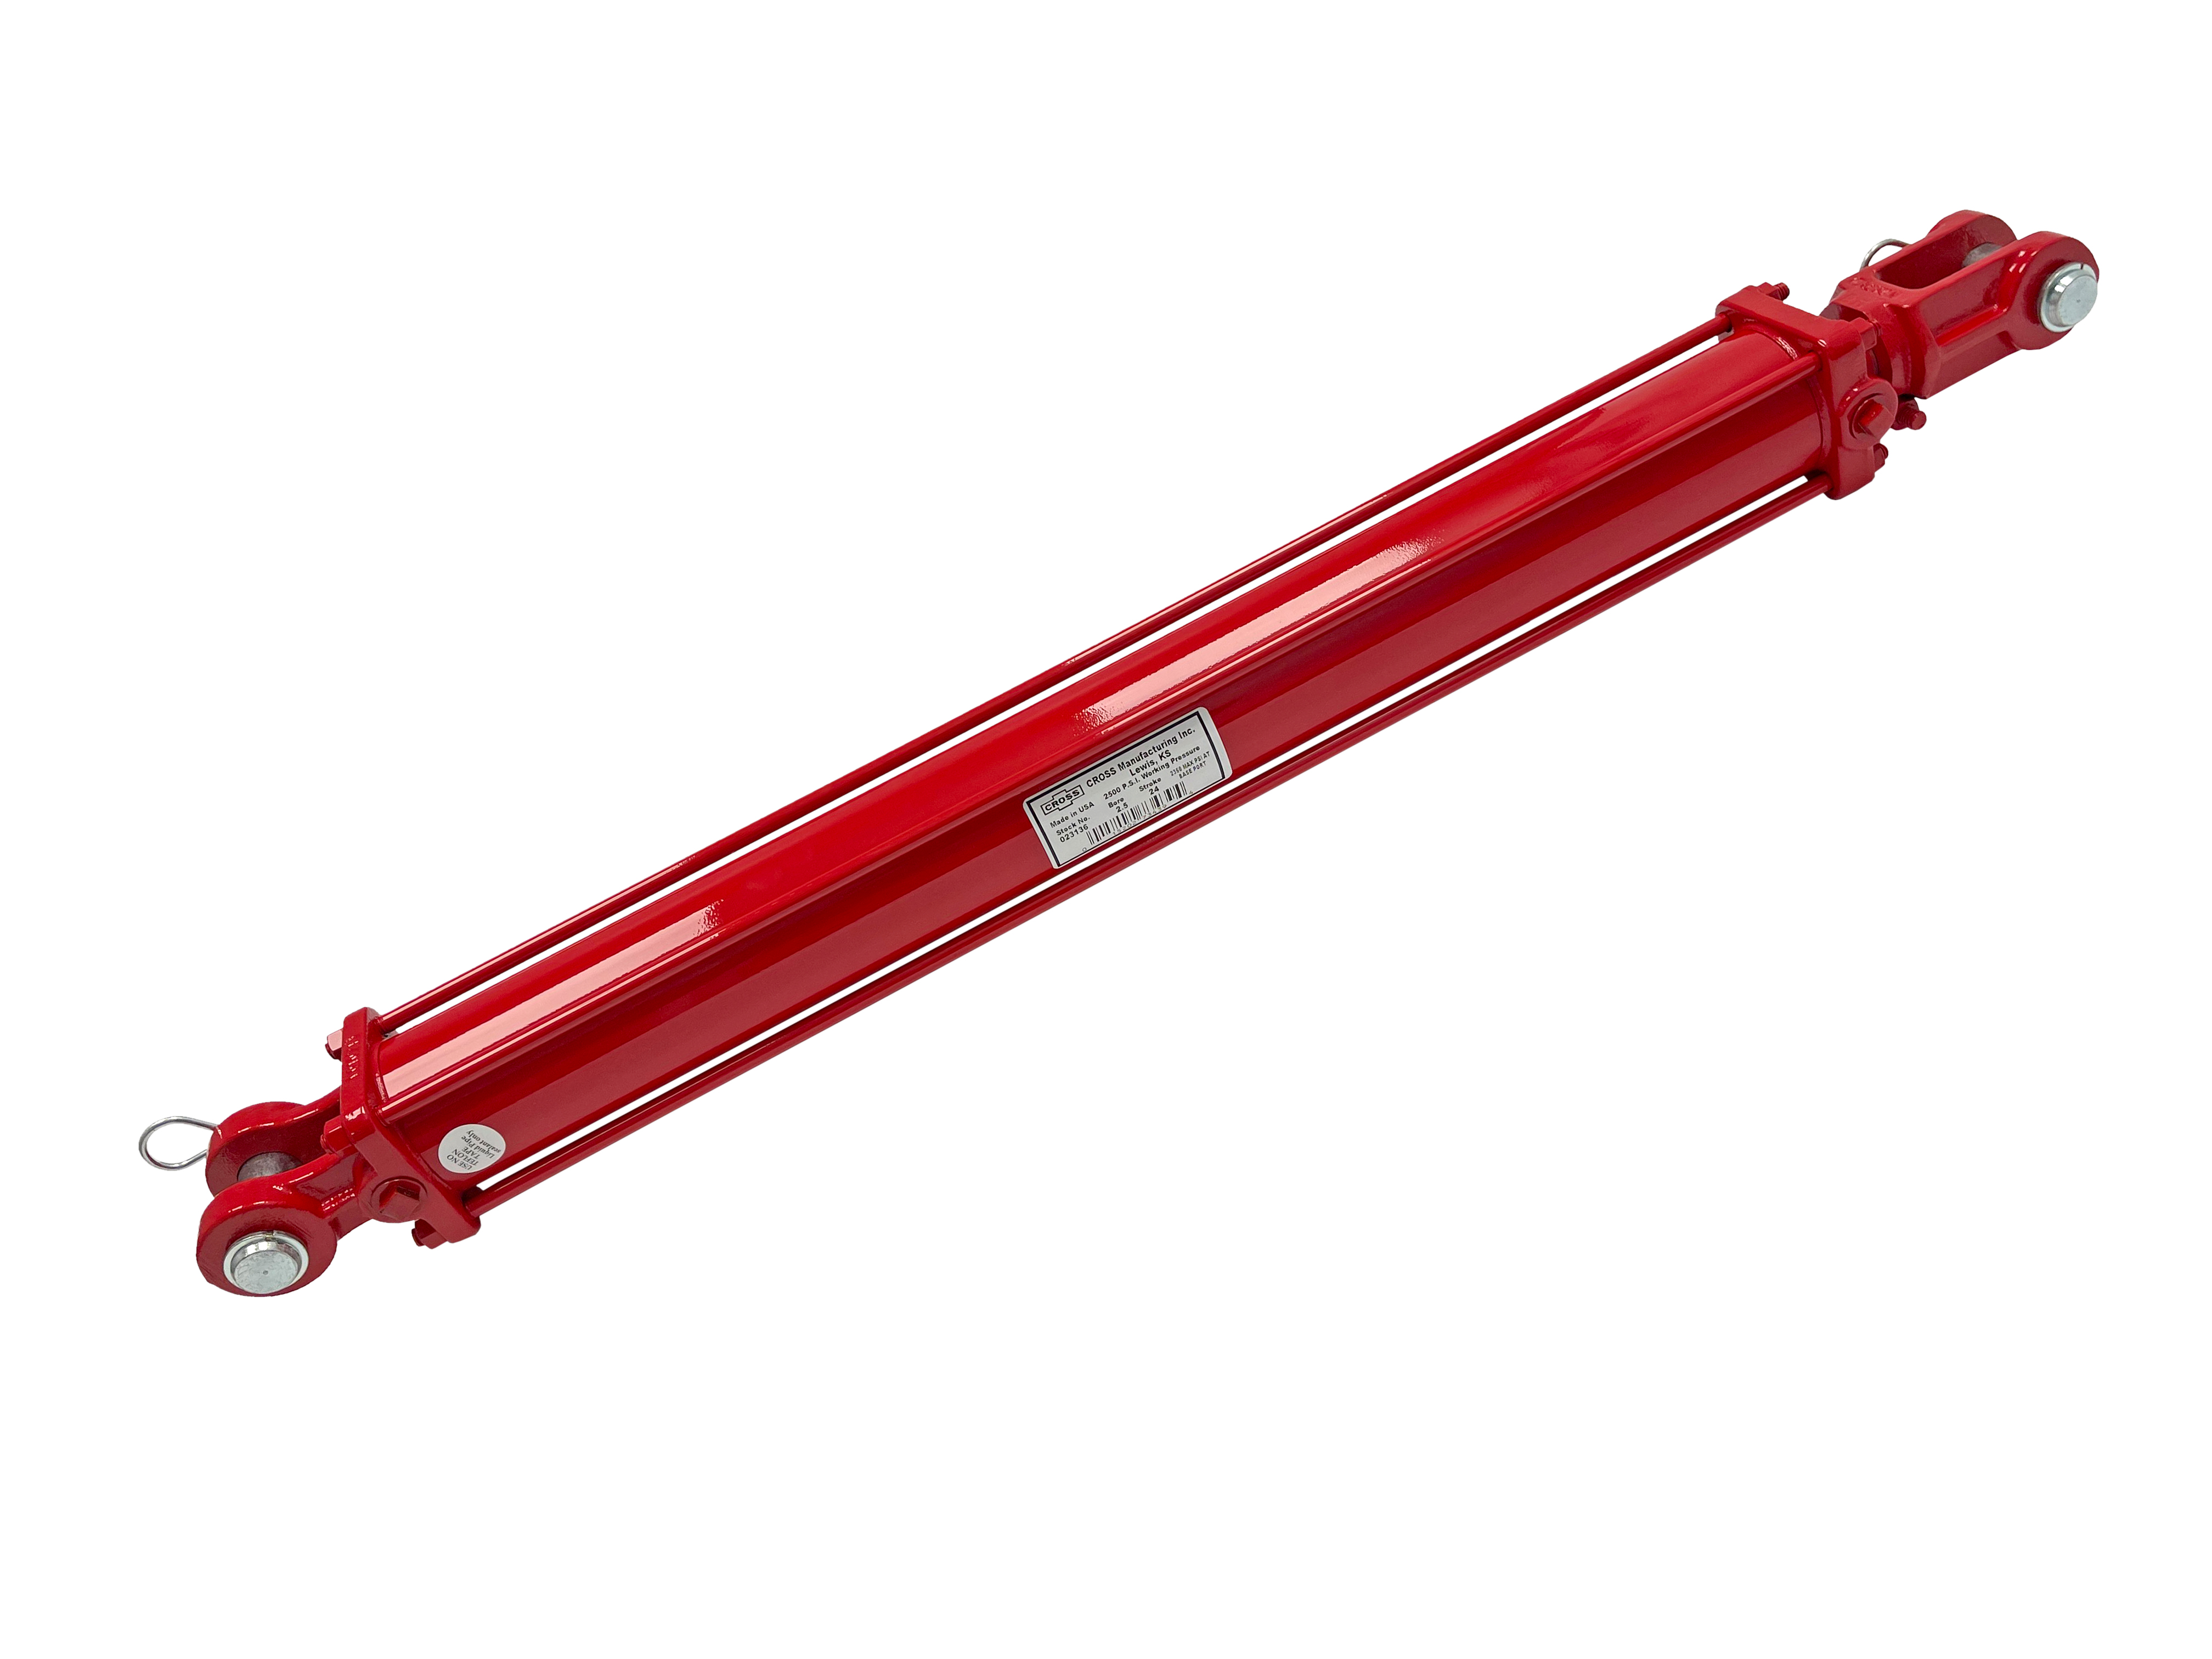 Details about   WEN TR3020 2500 PSI Tie Rod Hydraulic Cylinder with 3 in Bore and 20 in Stroke 